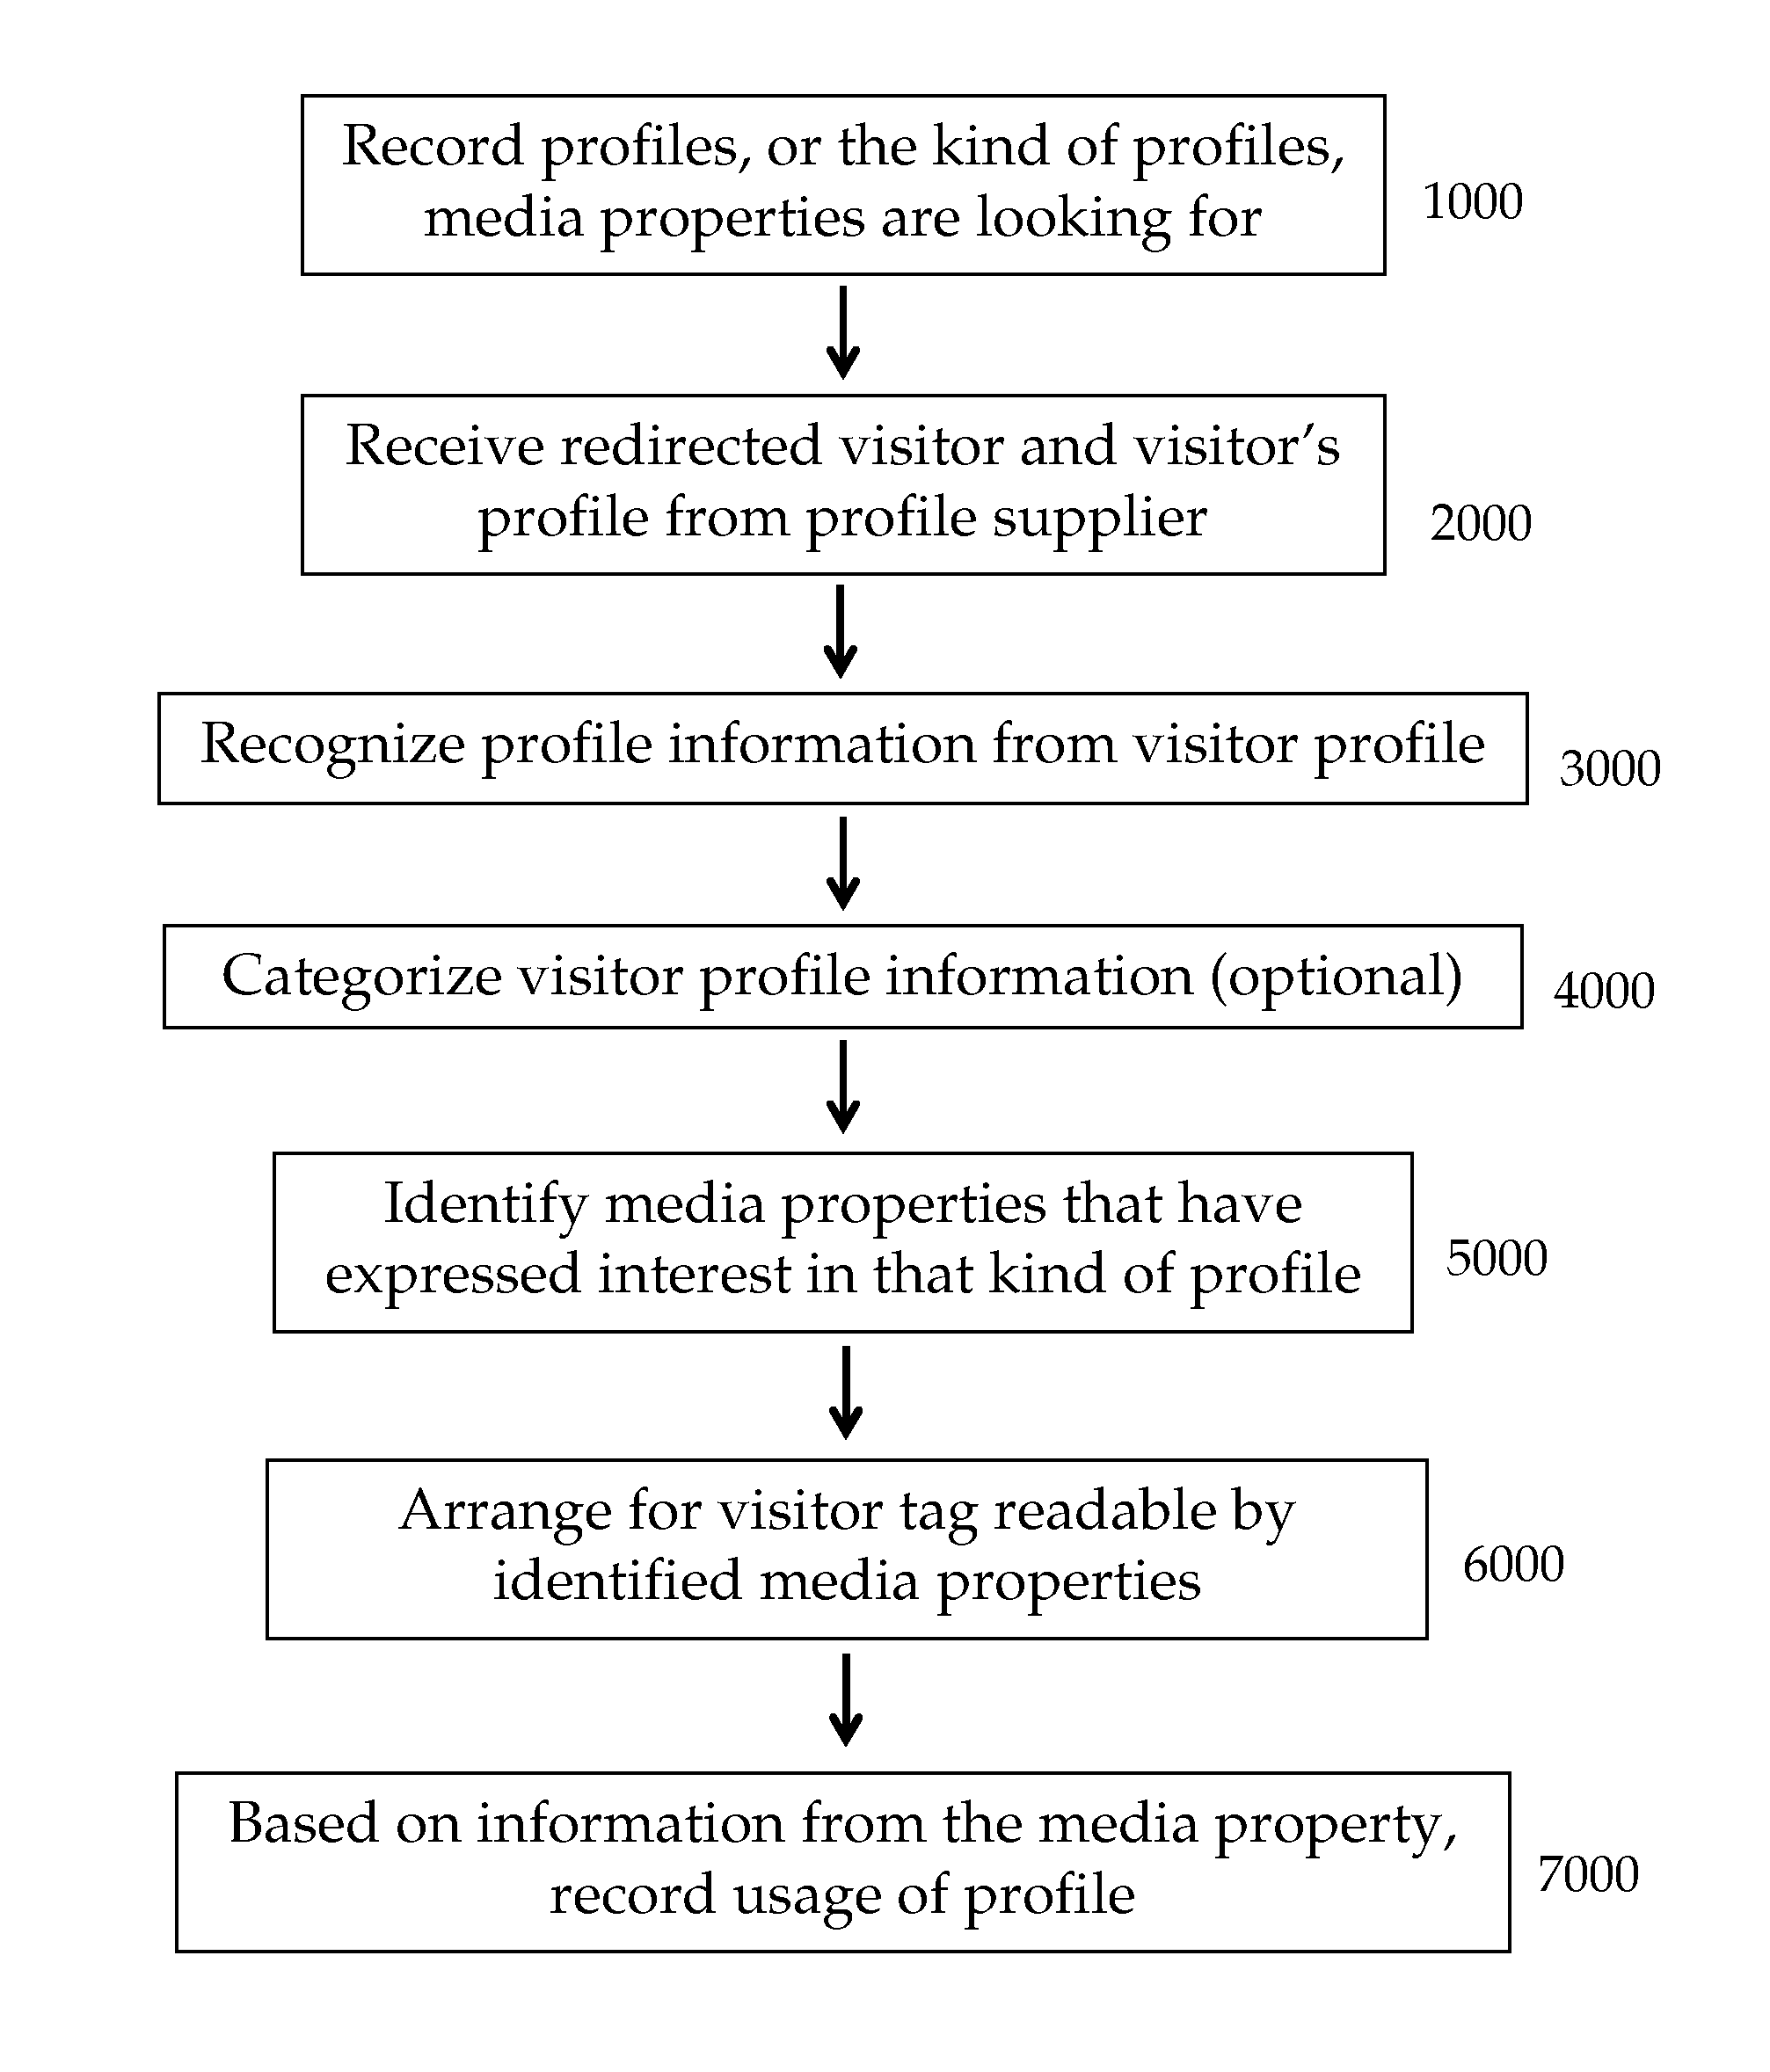 Providing collected profiles to media properties having specified interests